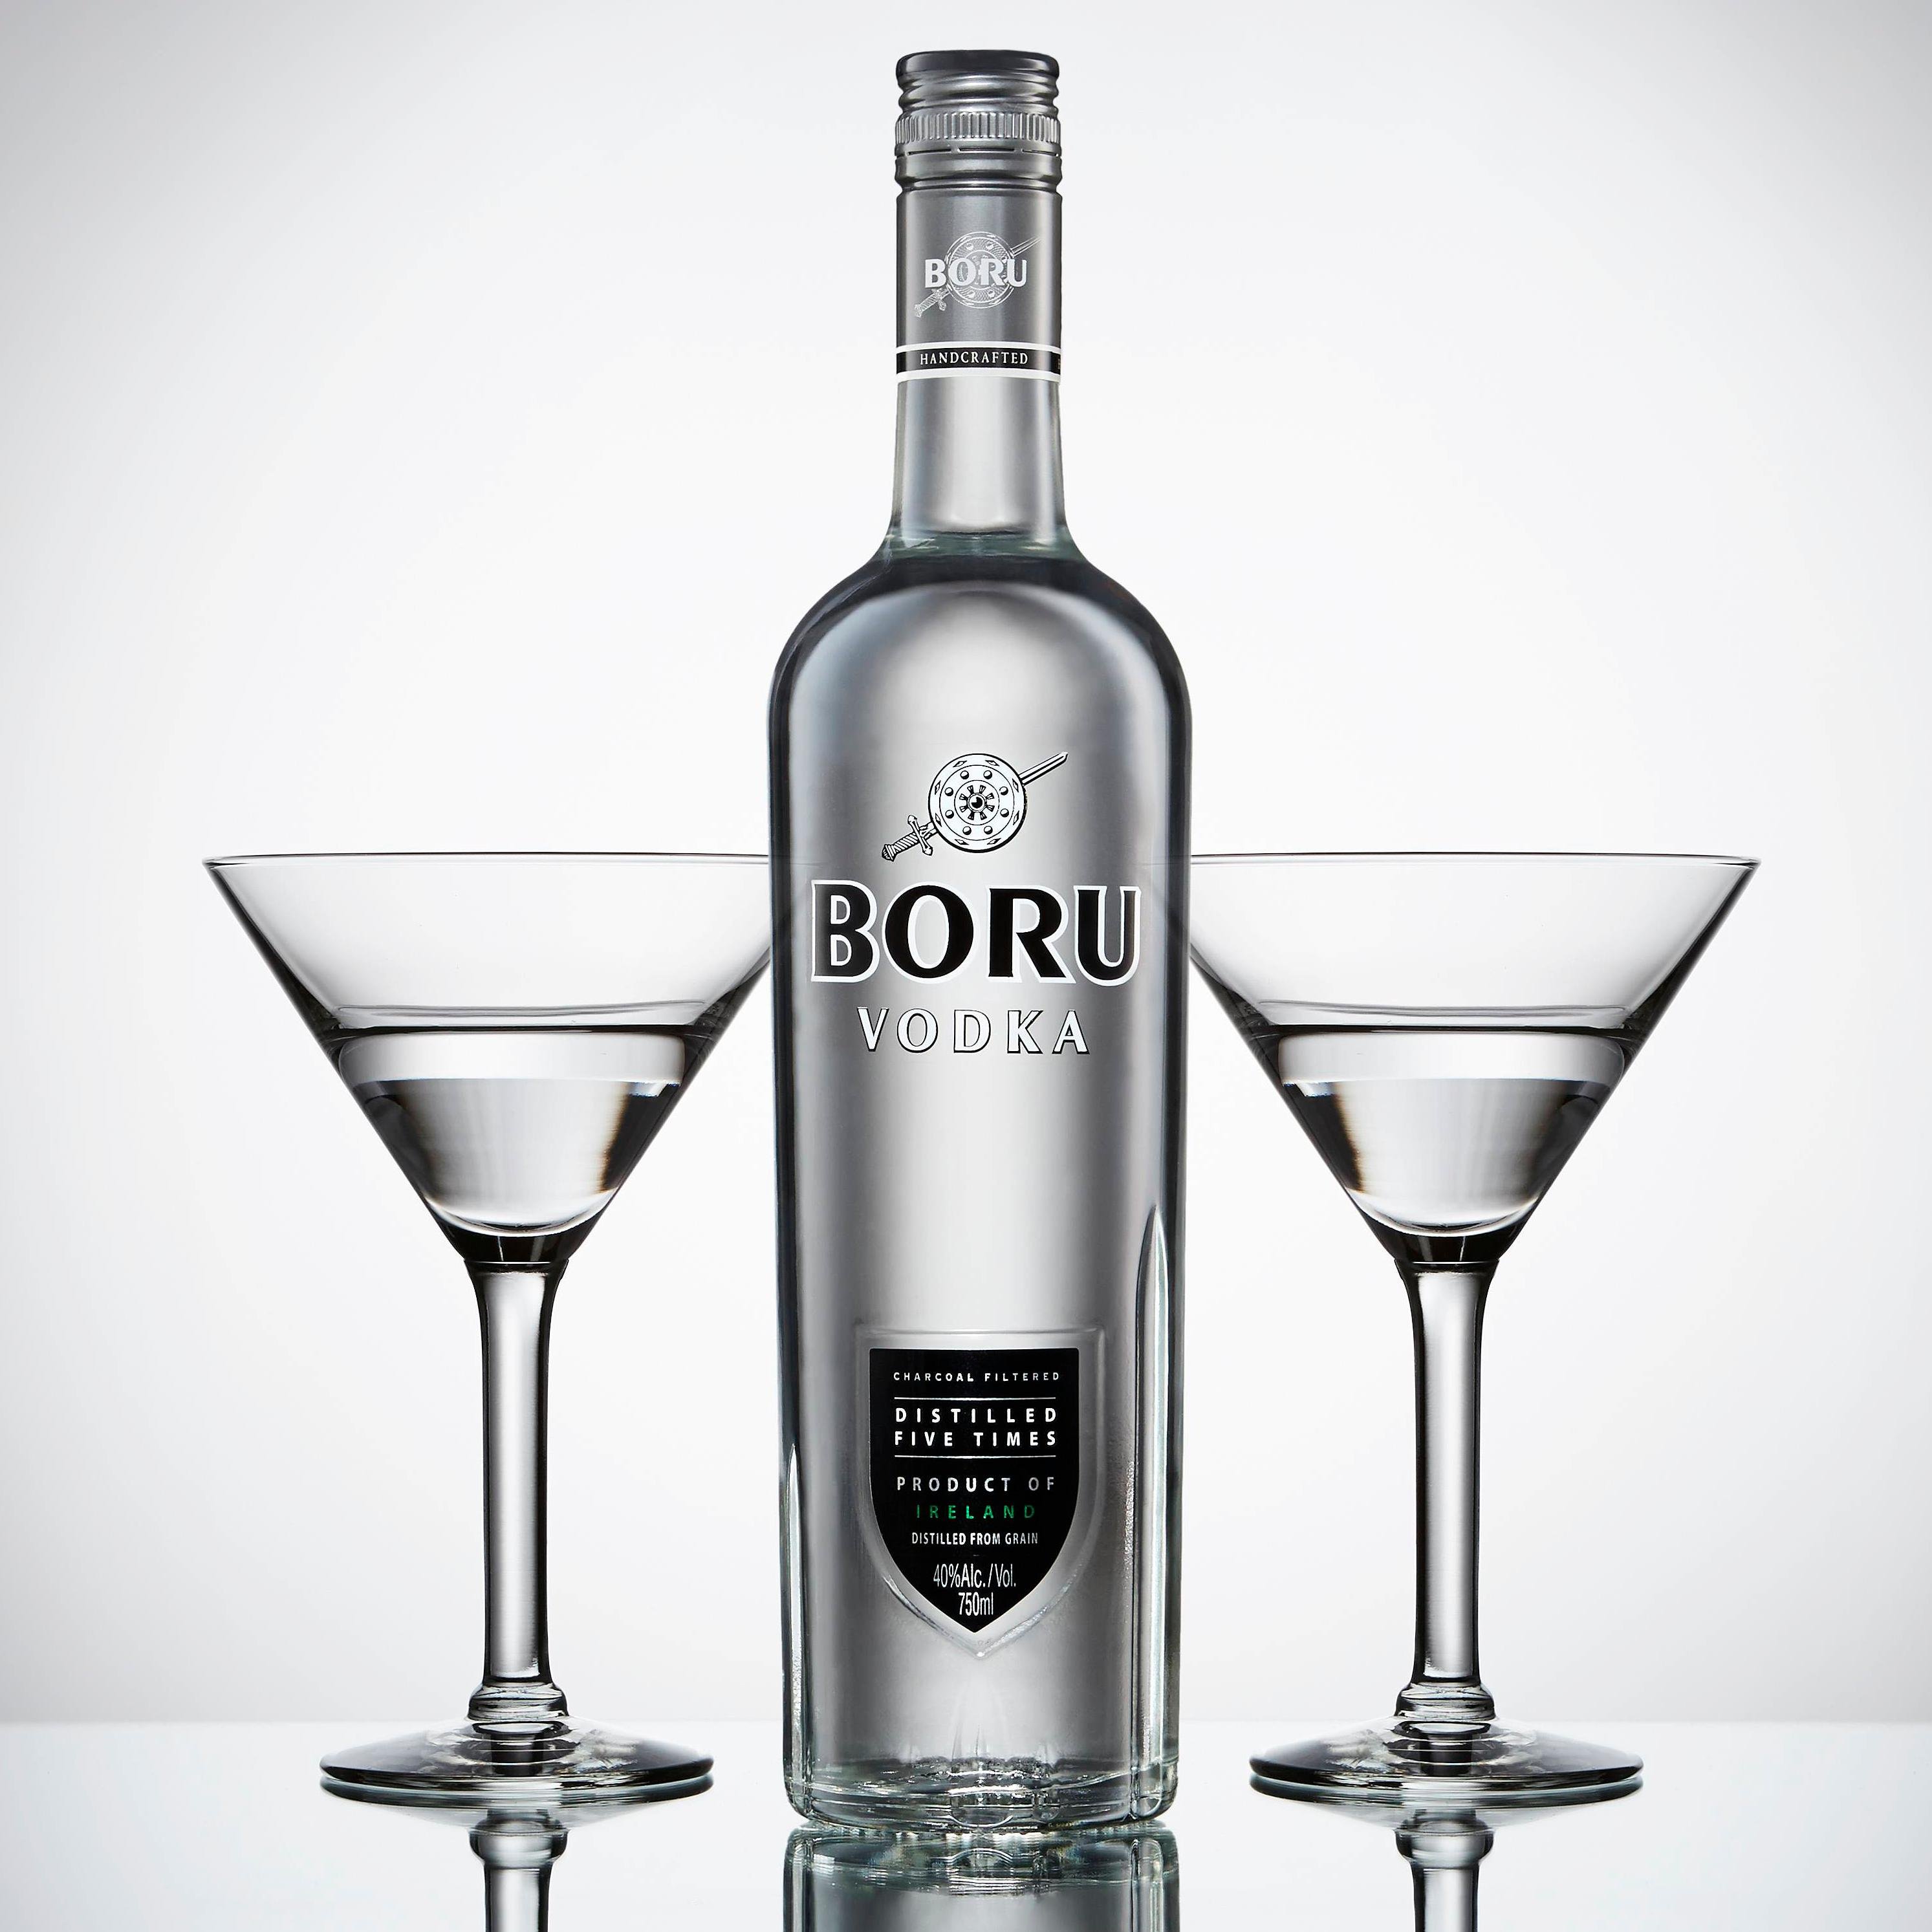 Irish vodka? You bet your arse. Inspired by the legendary High King of Ireland, Brian Boru. 21 & over. Sláinte!